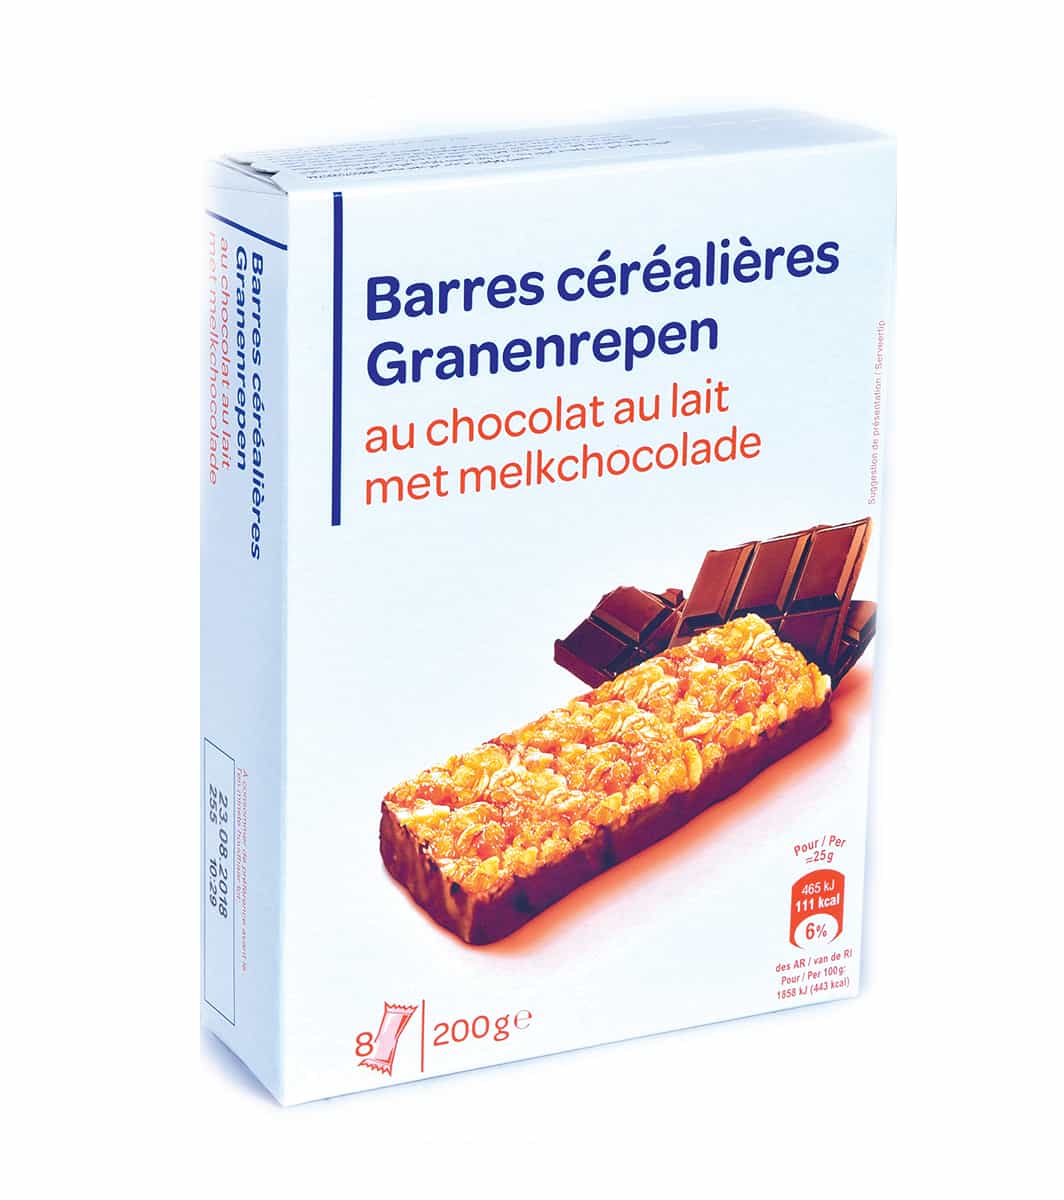 https://carrefourmaroc.ma/wp-content/uploads/2020/08/Barres-cereales-chocolat-200g.jpg